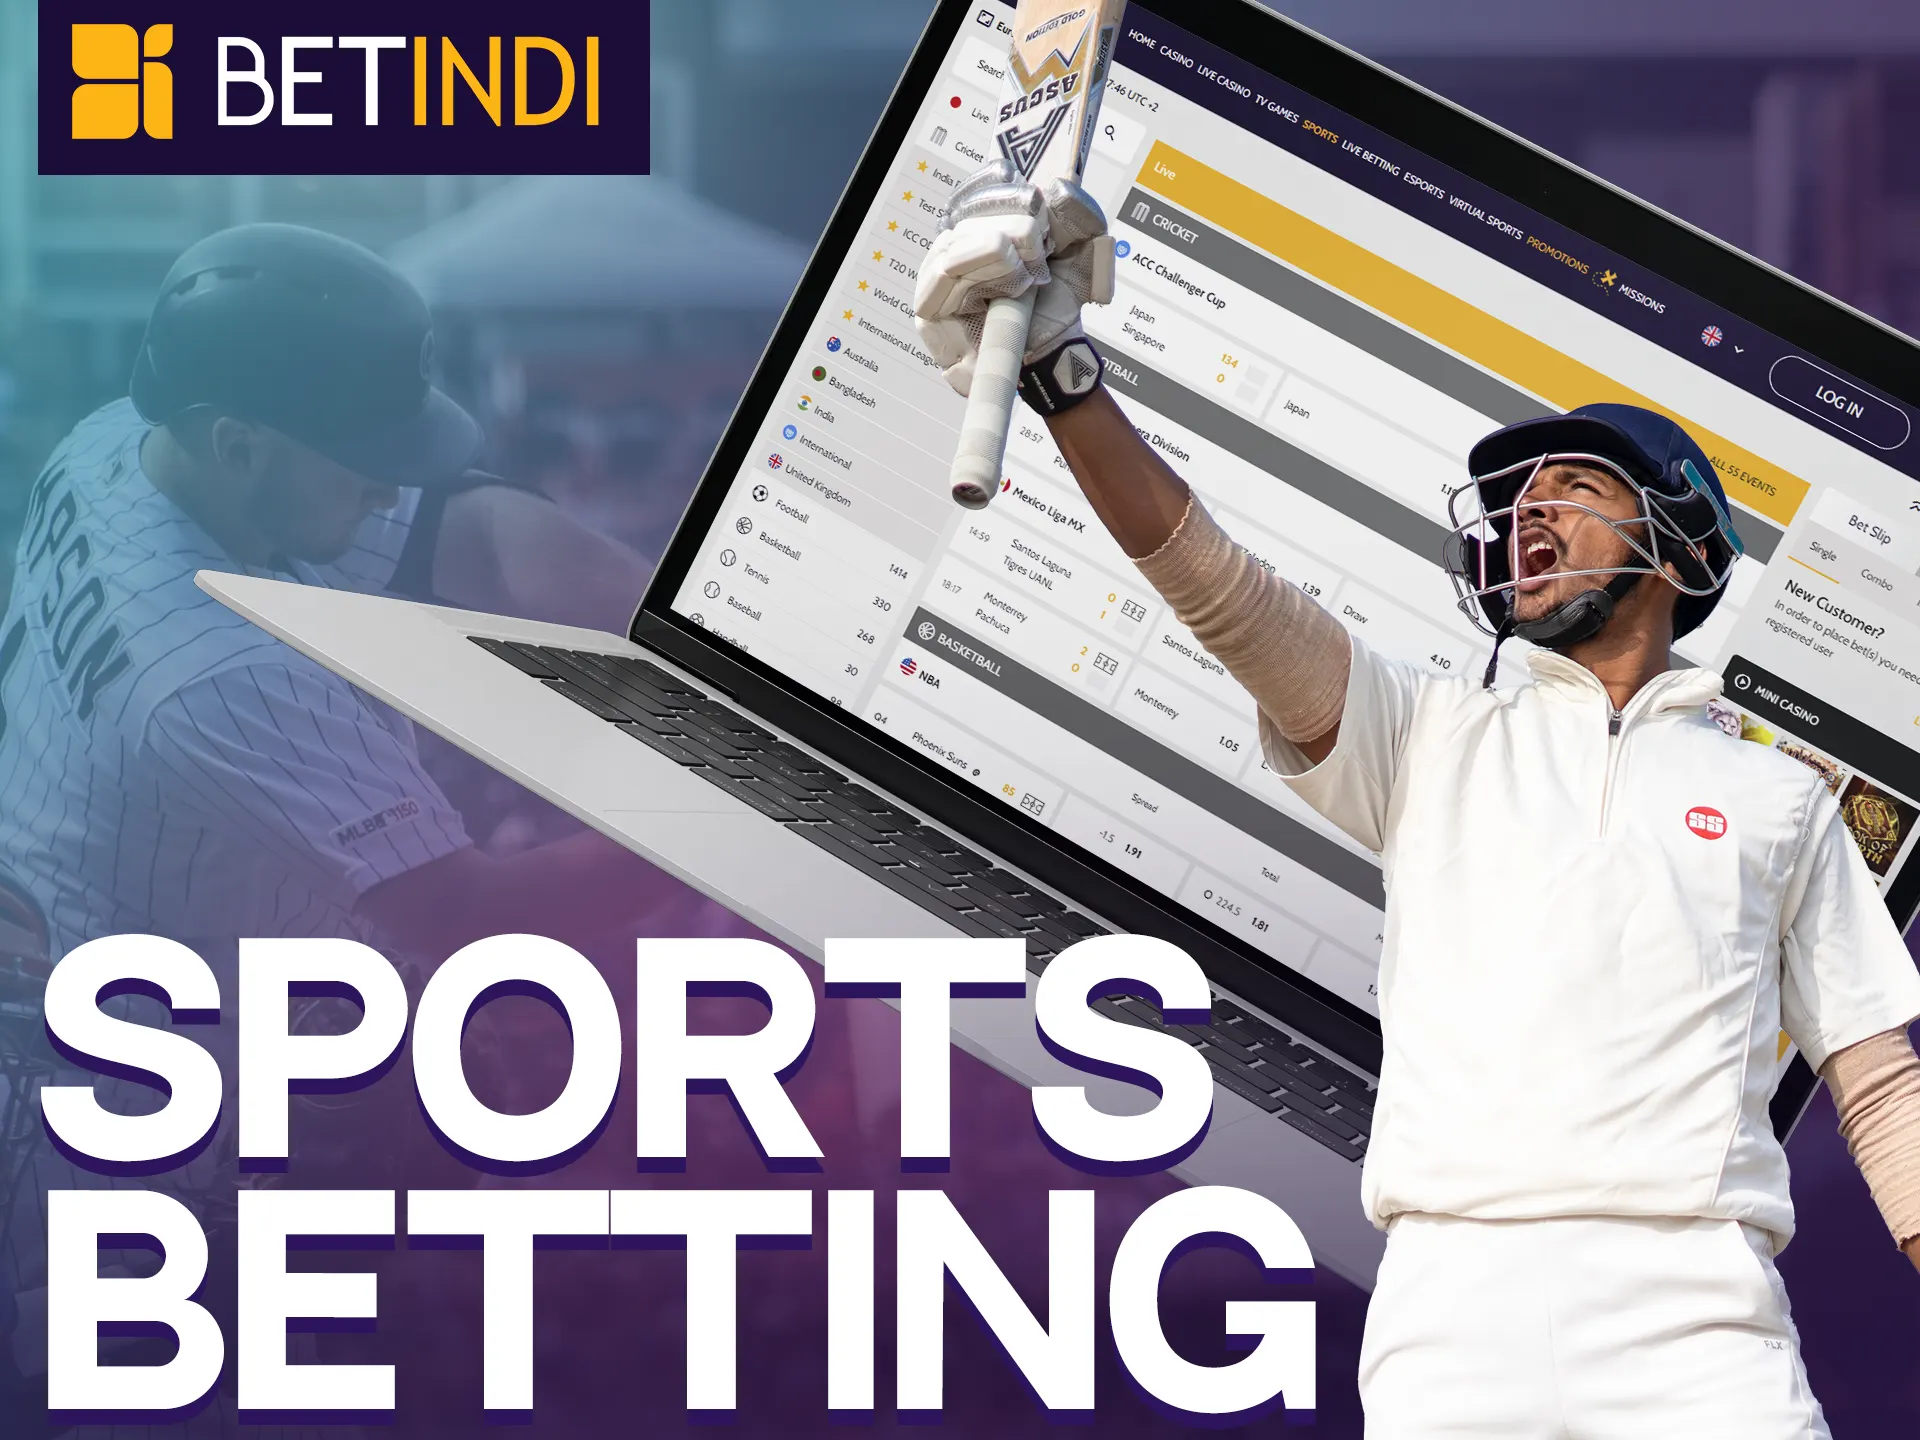 Explore sports betting with Betindi for high odds.